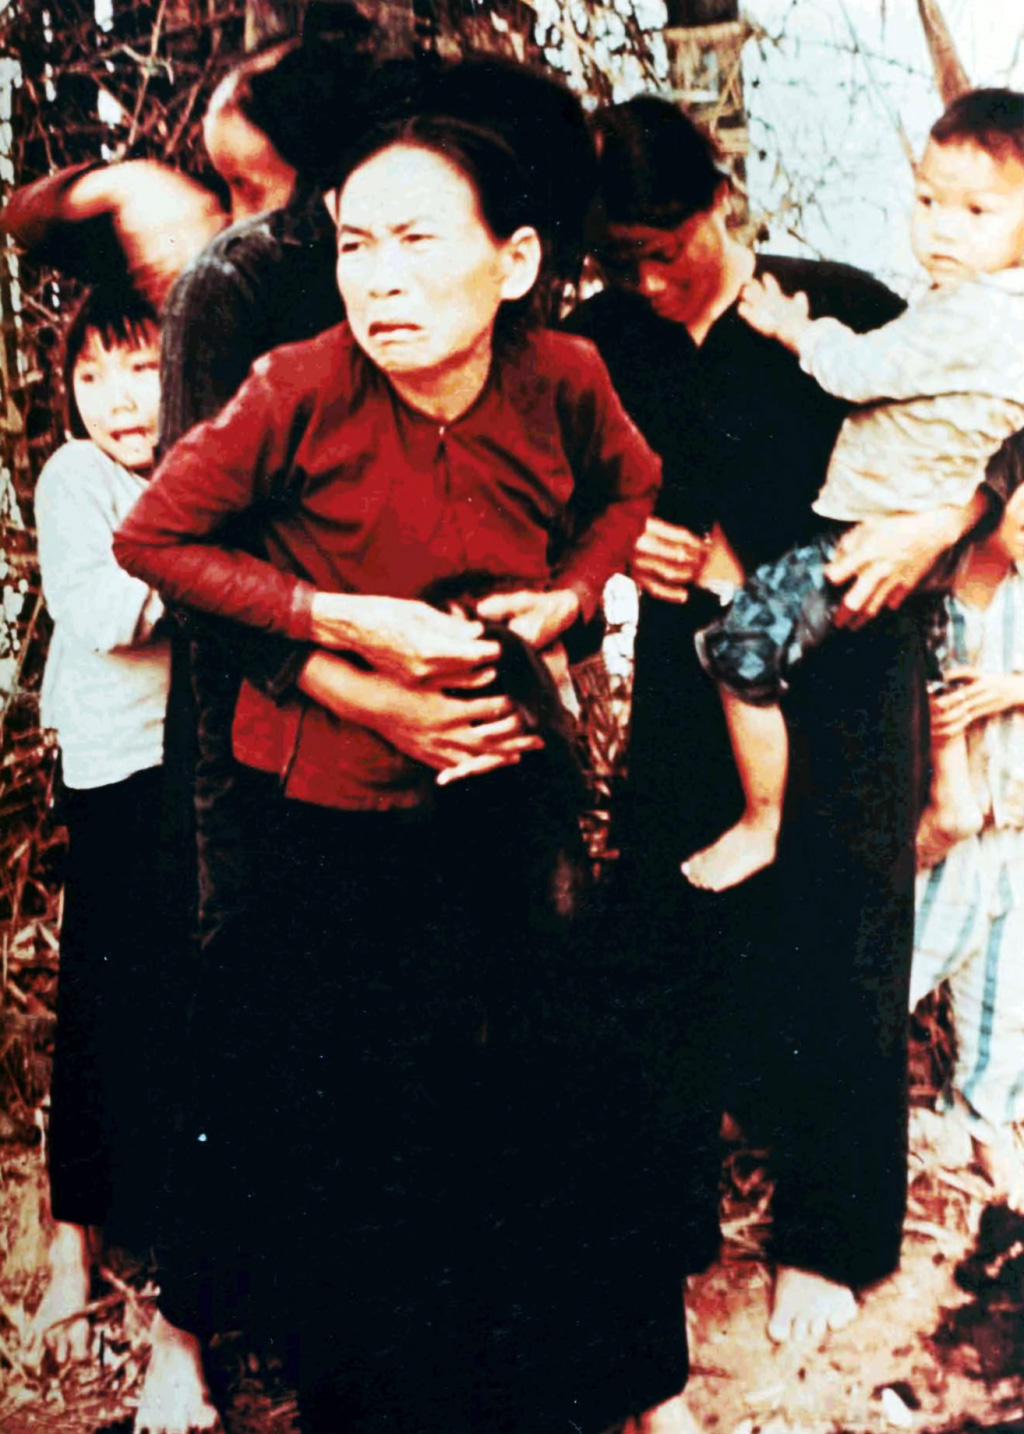 Unidentified Vietnamese women and children before being killed in the My Lai Massacre.